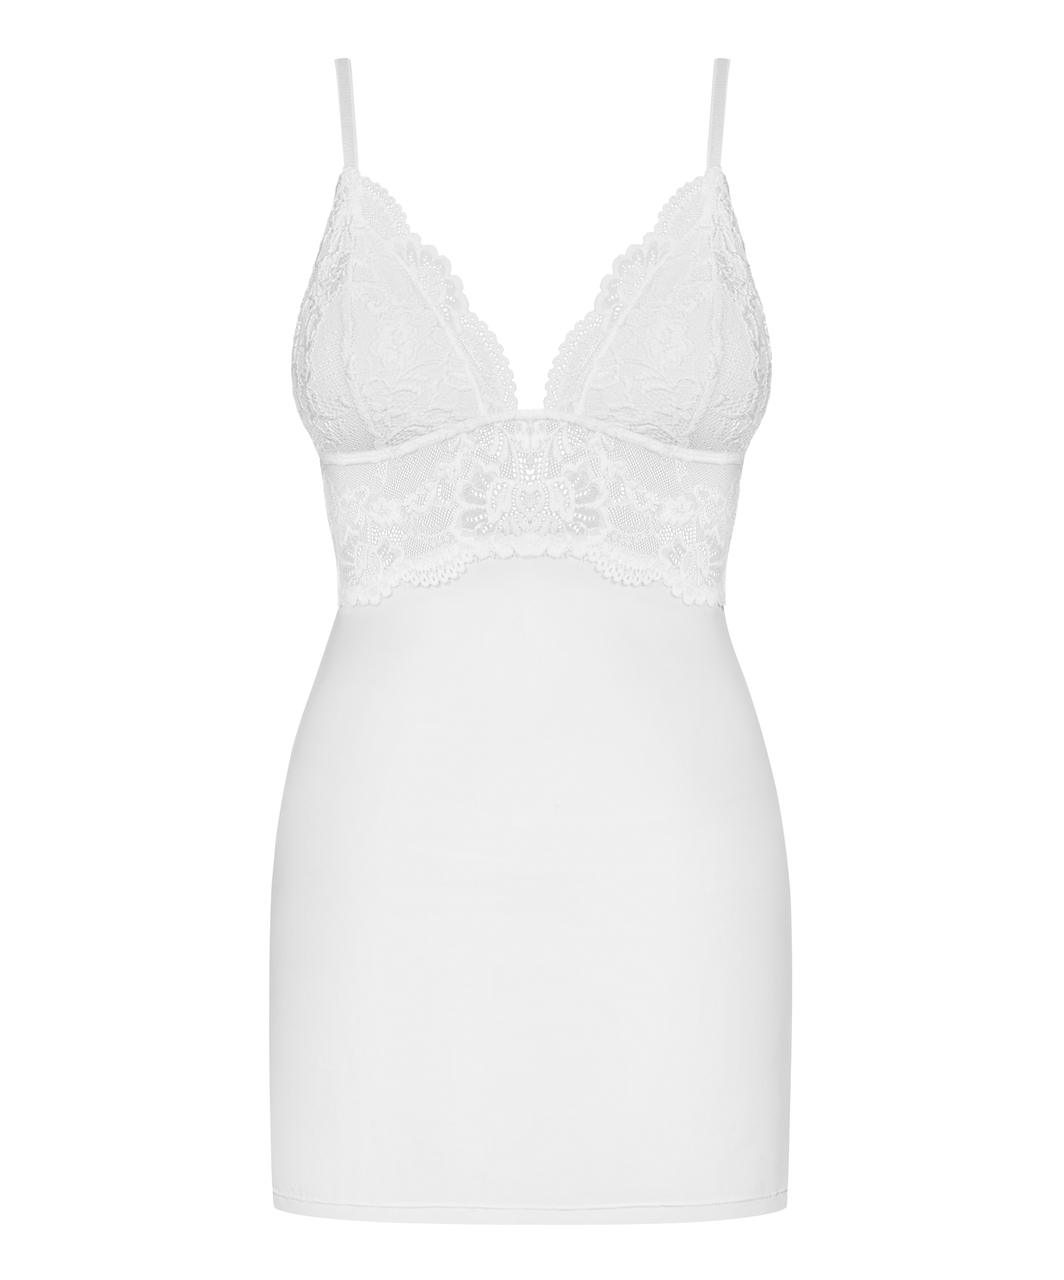 Obsessive white chemise with padded cups